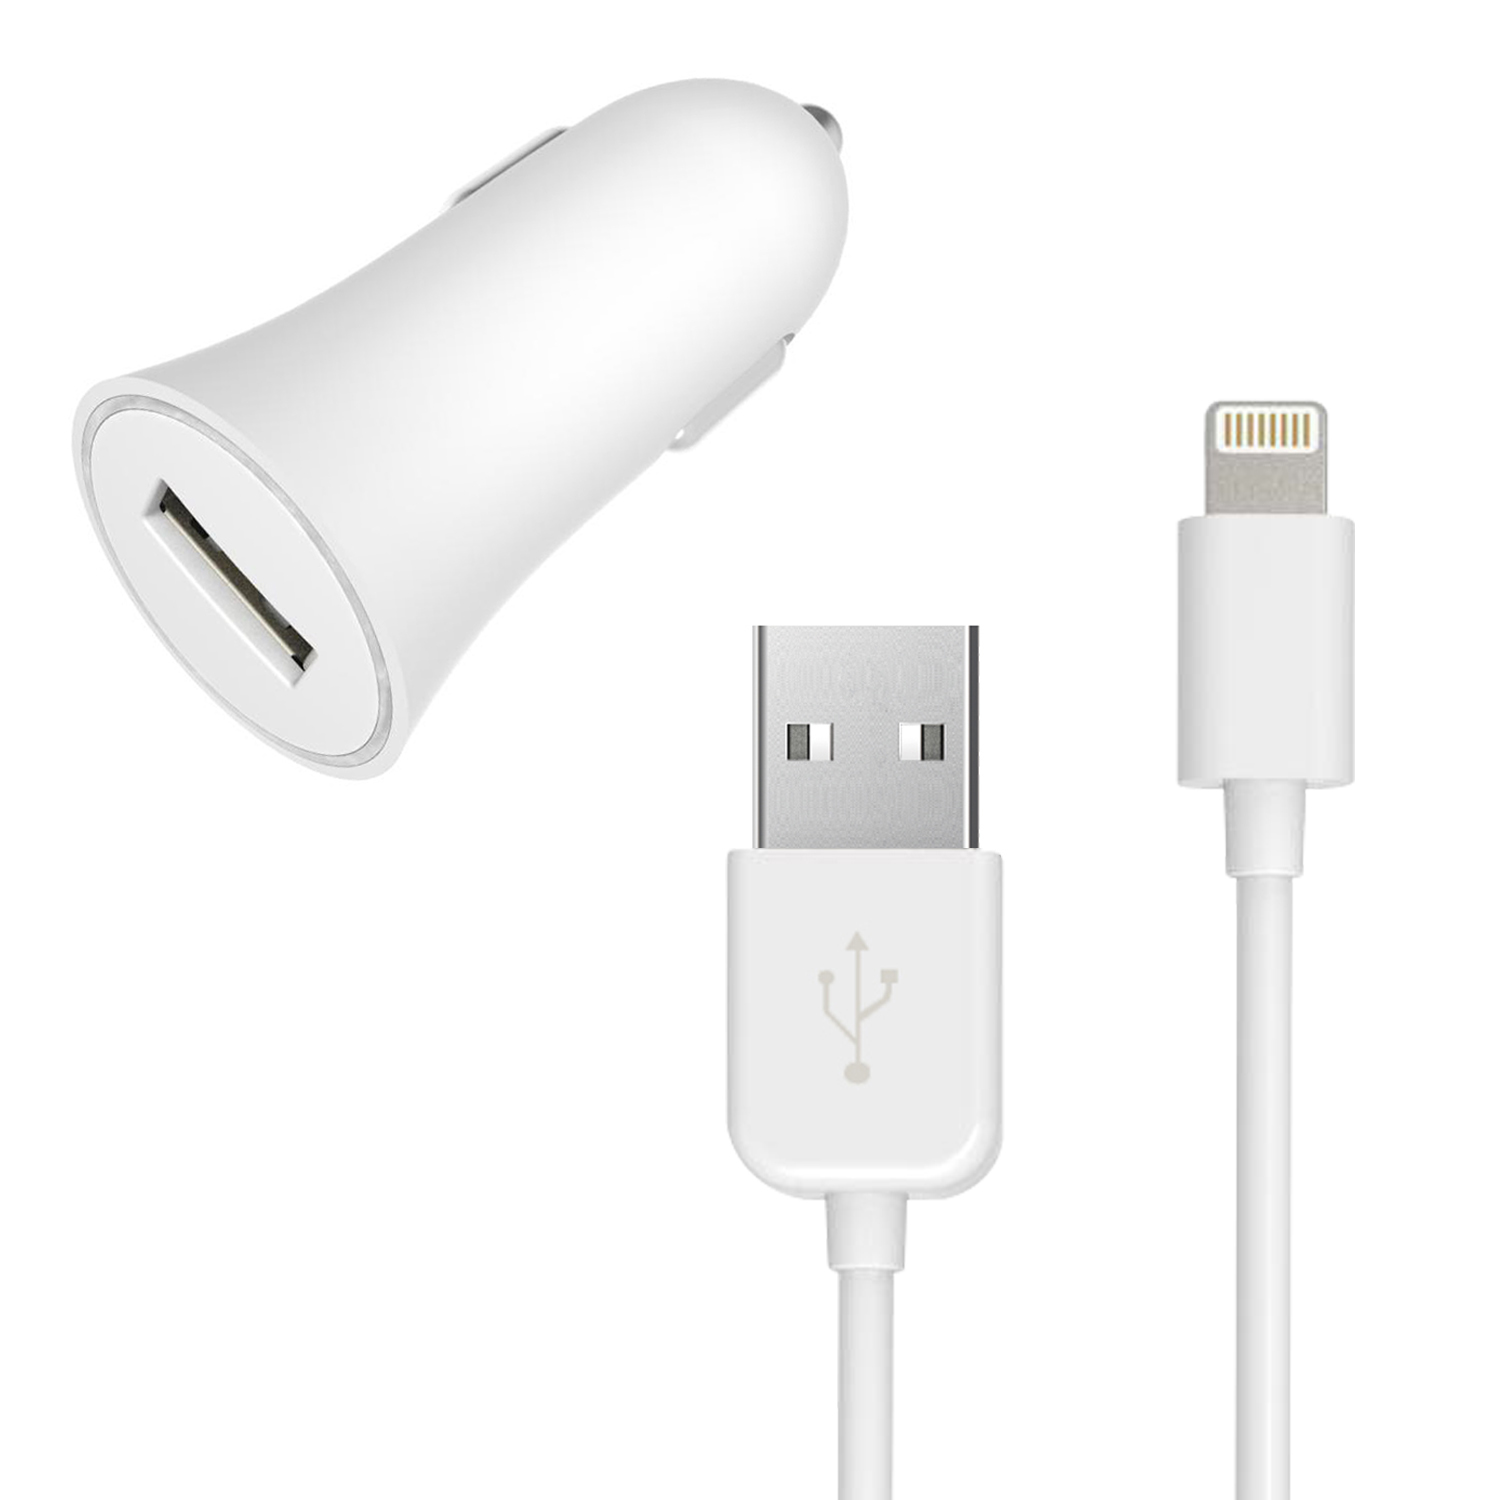 Fast car charger 1 USB + Lightning Cable for iPhone, iPad 1m - Schneider